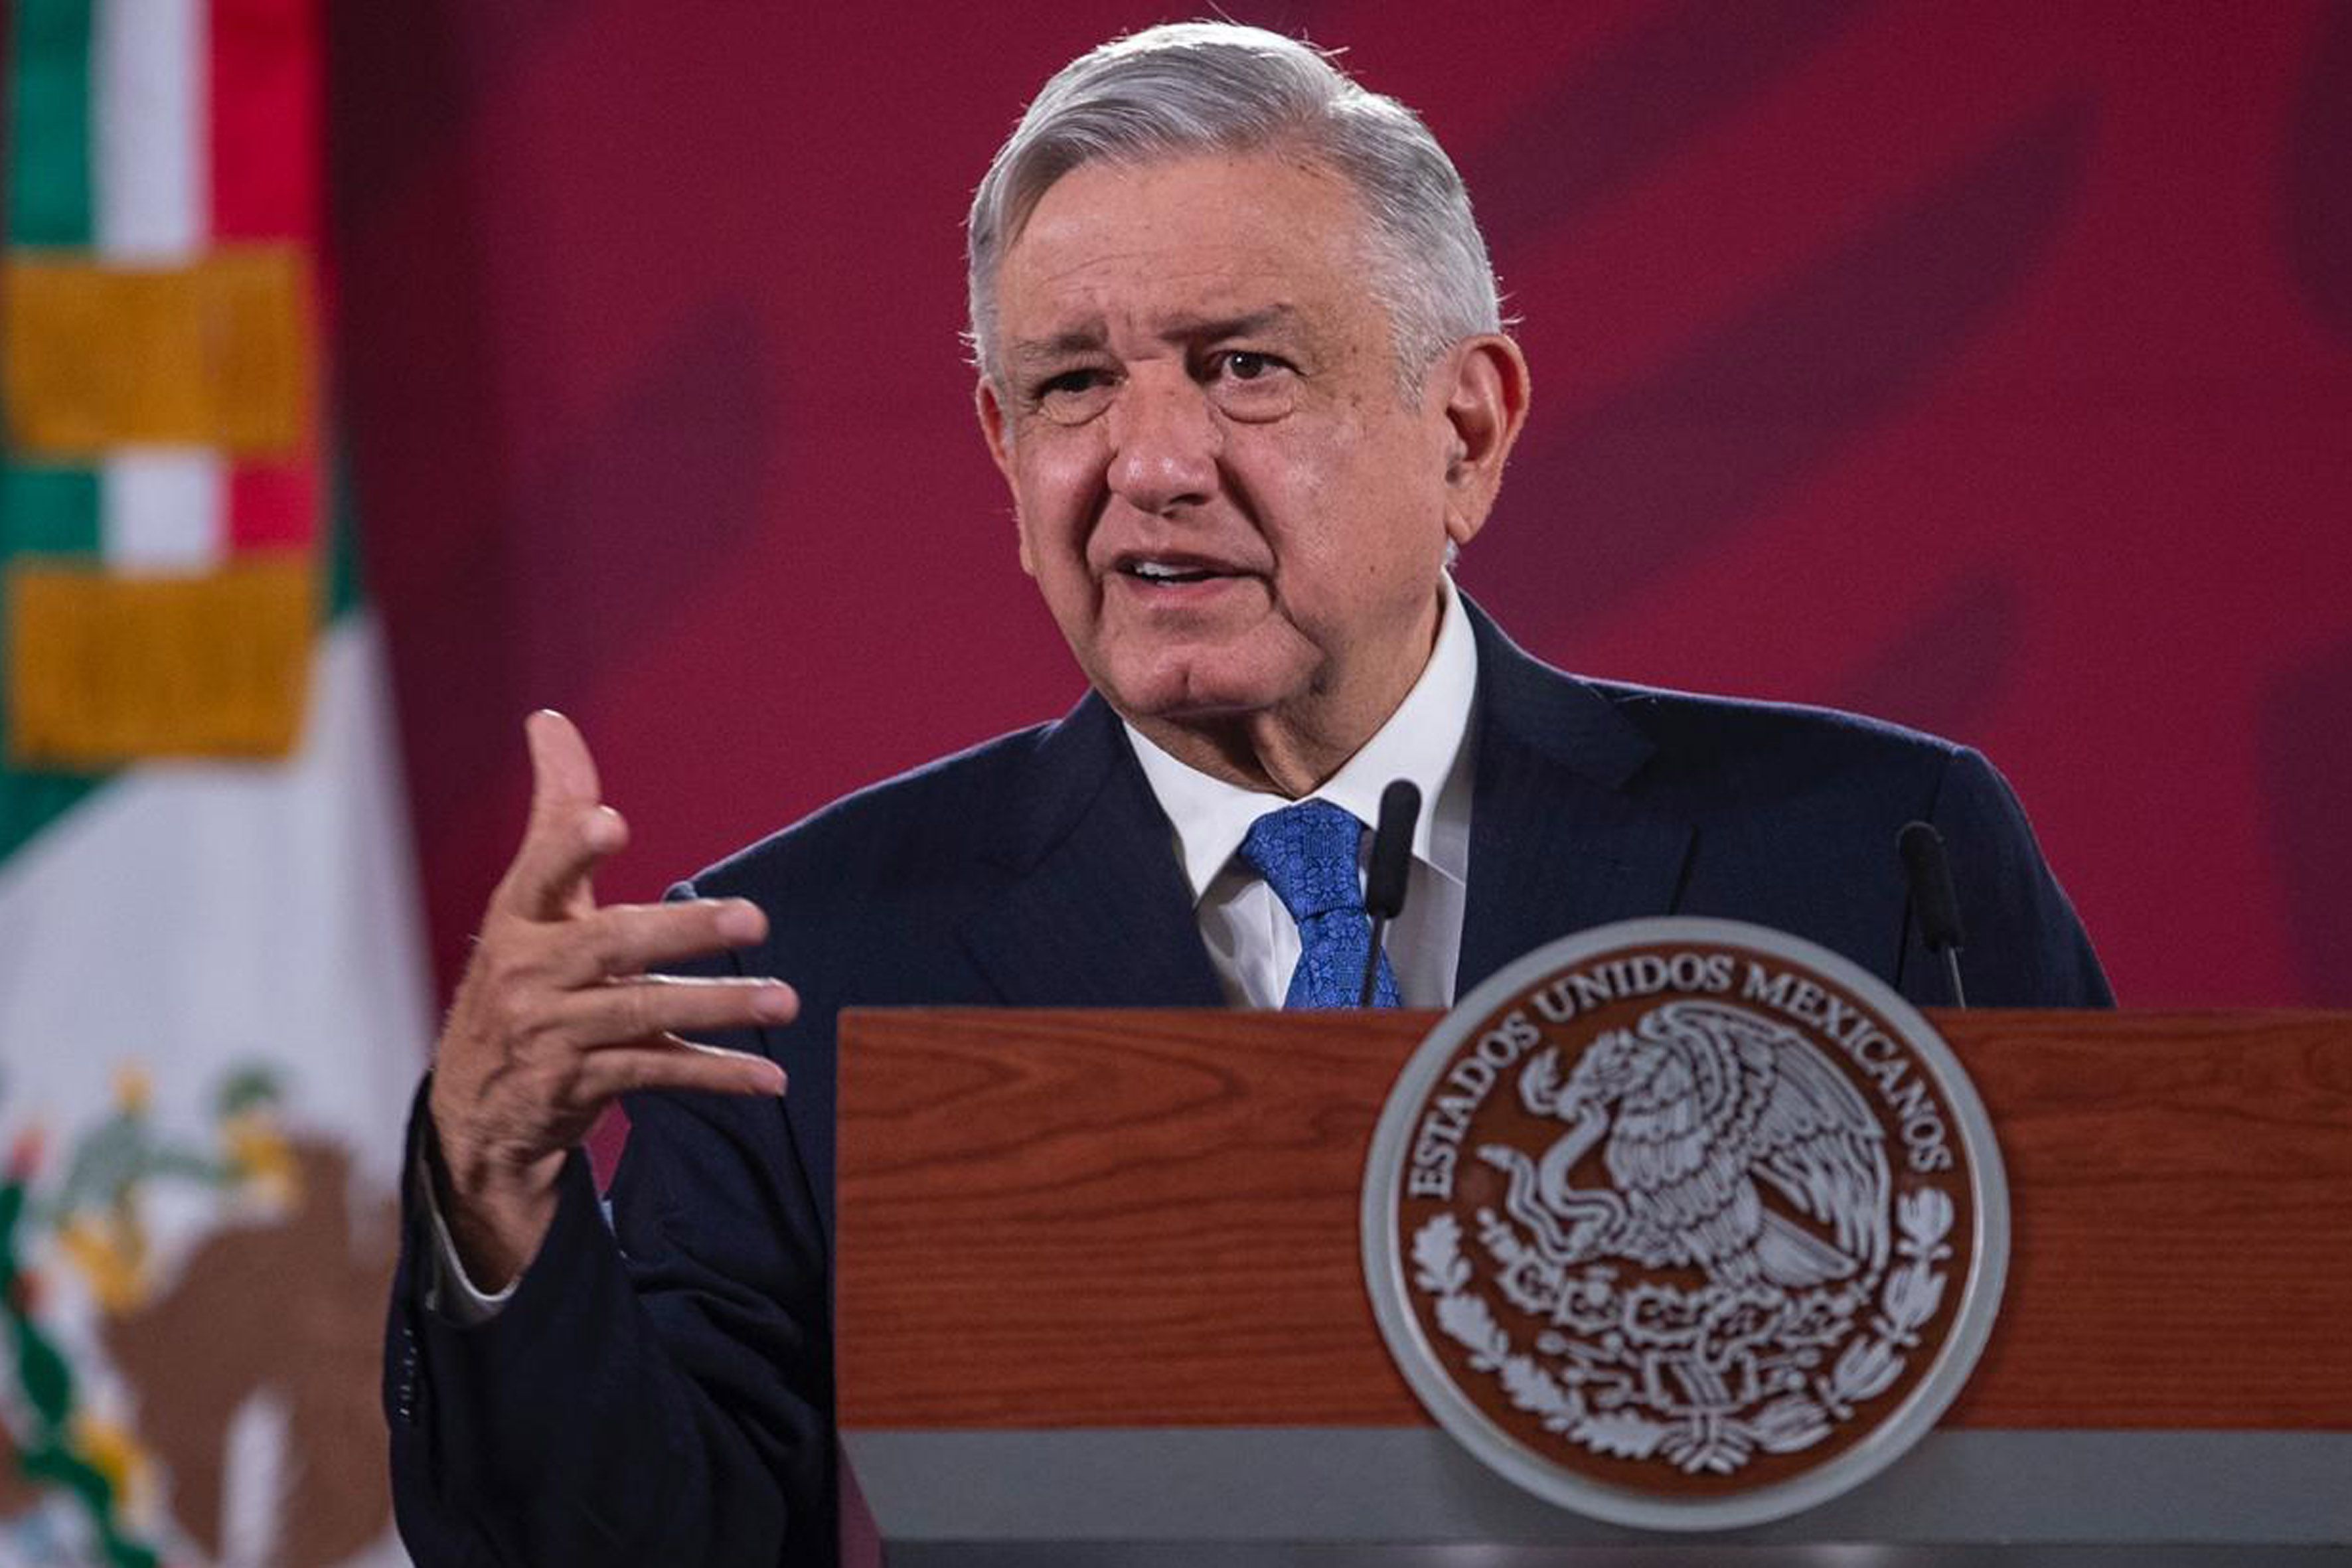 07/07/2020 07 July 2020, Mexico, Mexico City: Mexican President Andres Manuel Lopez Obrador speaks during his daily press conference at the National Palace. Photo: -/El Universal via ZUMA Wire/dpa POLITICA INTERNACIONAL -/El Universal via ZUMA Wire/dpa 